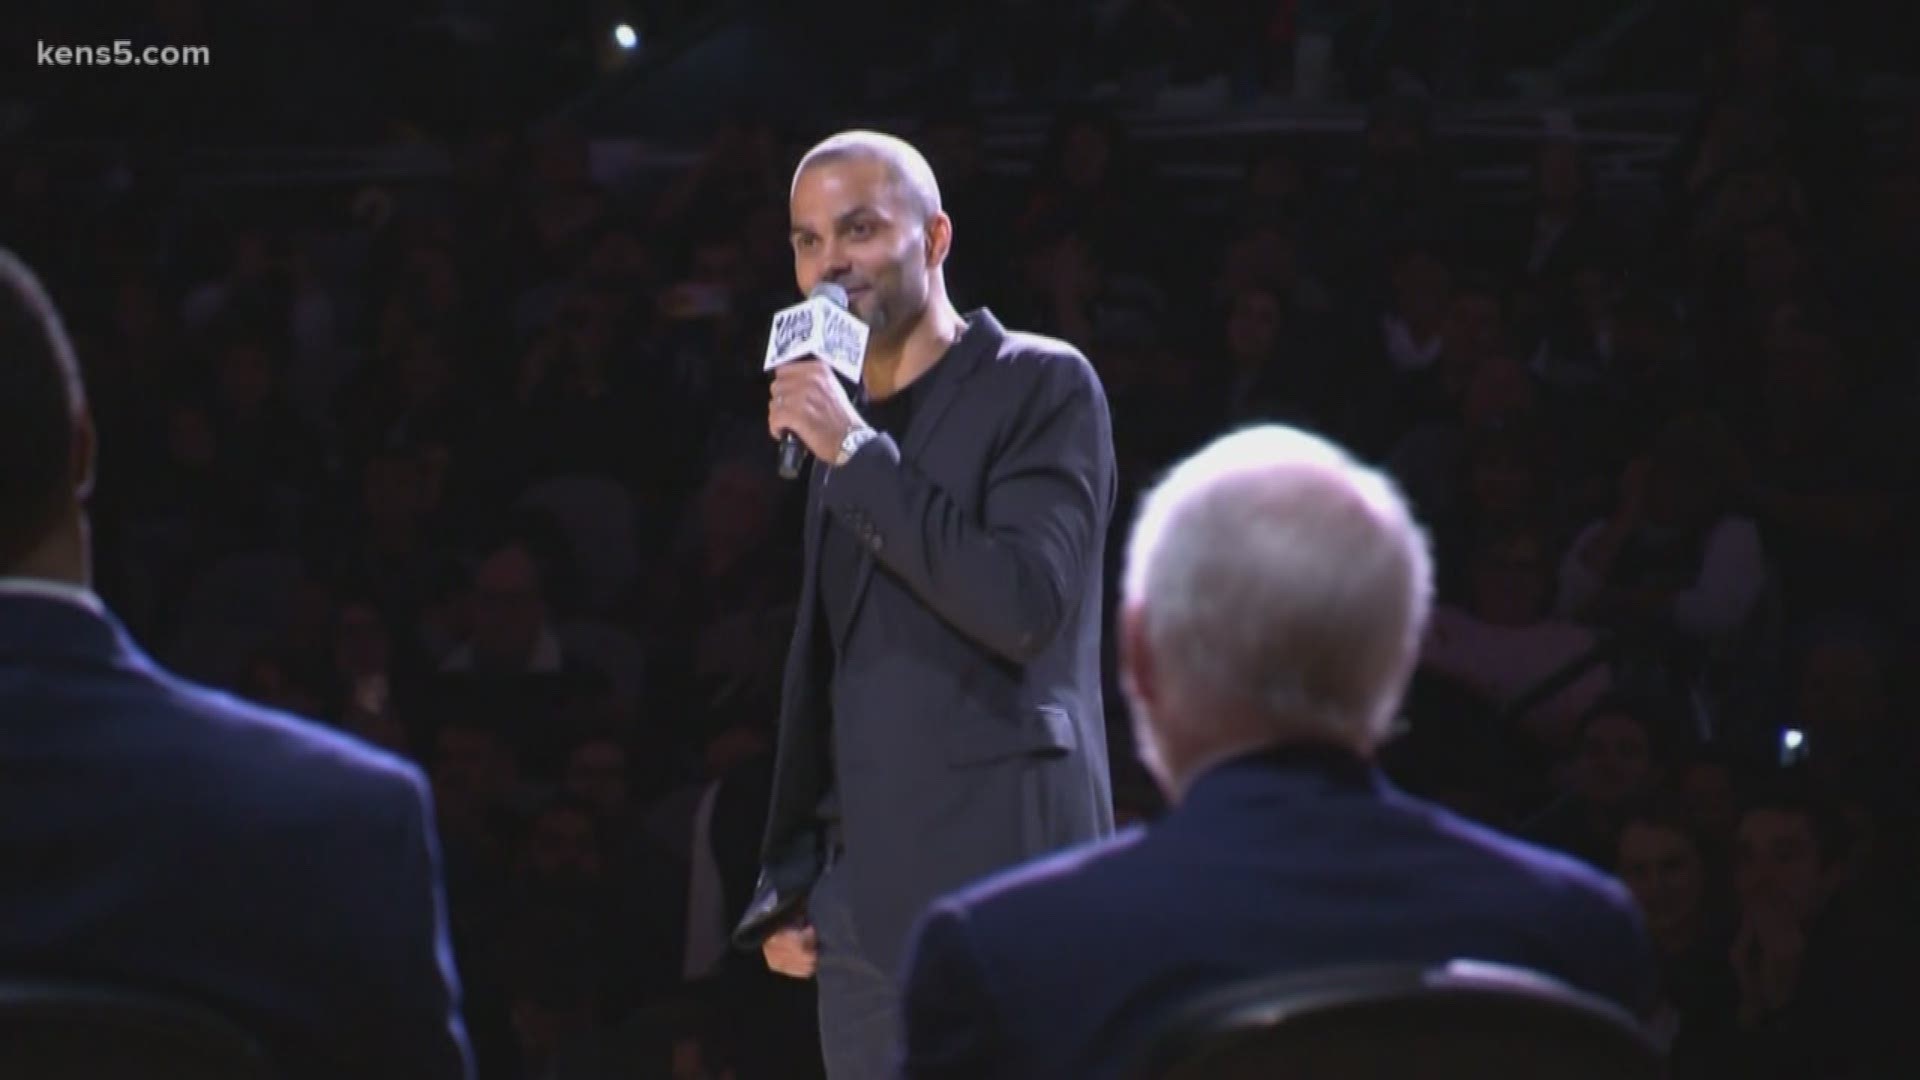 Tony Parker reflected on his time as a member of San Antonio's Big Three as his jersey was retired next to Tim Duncan's and Manu Ginobili's.